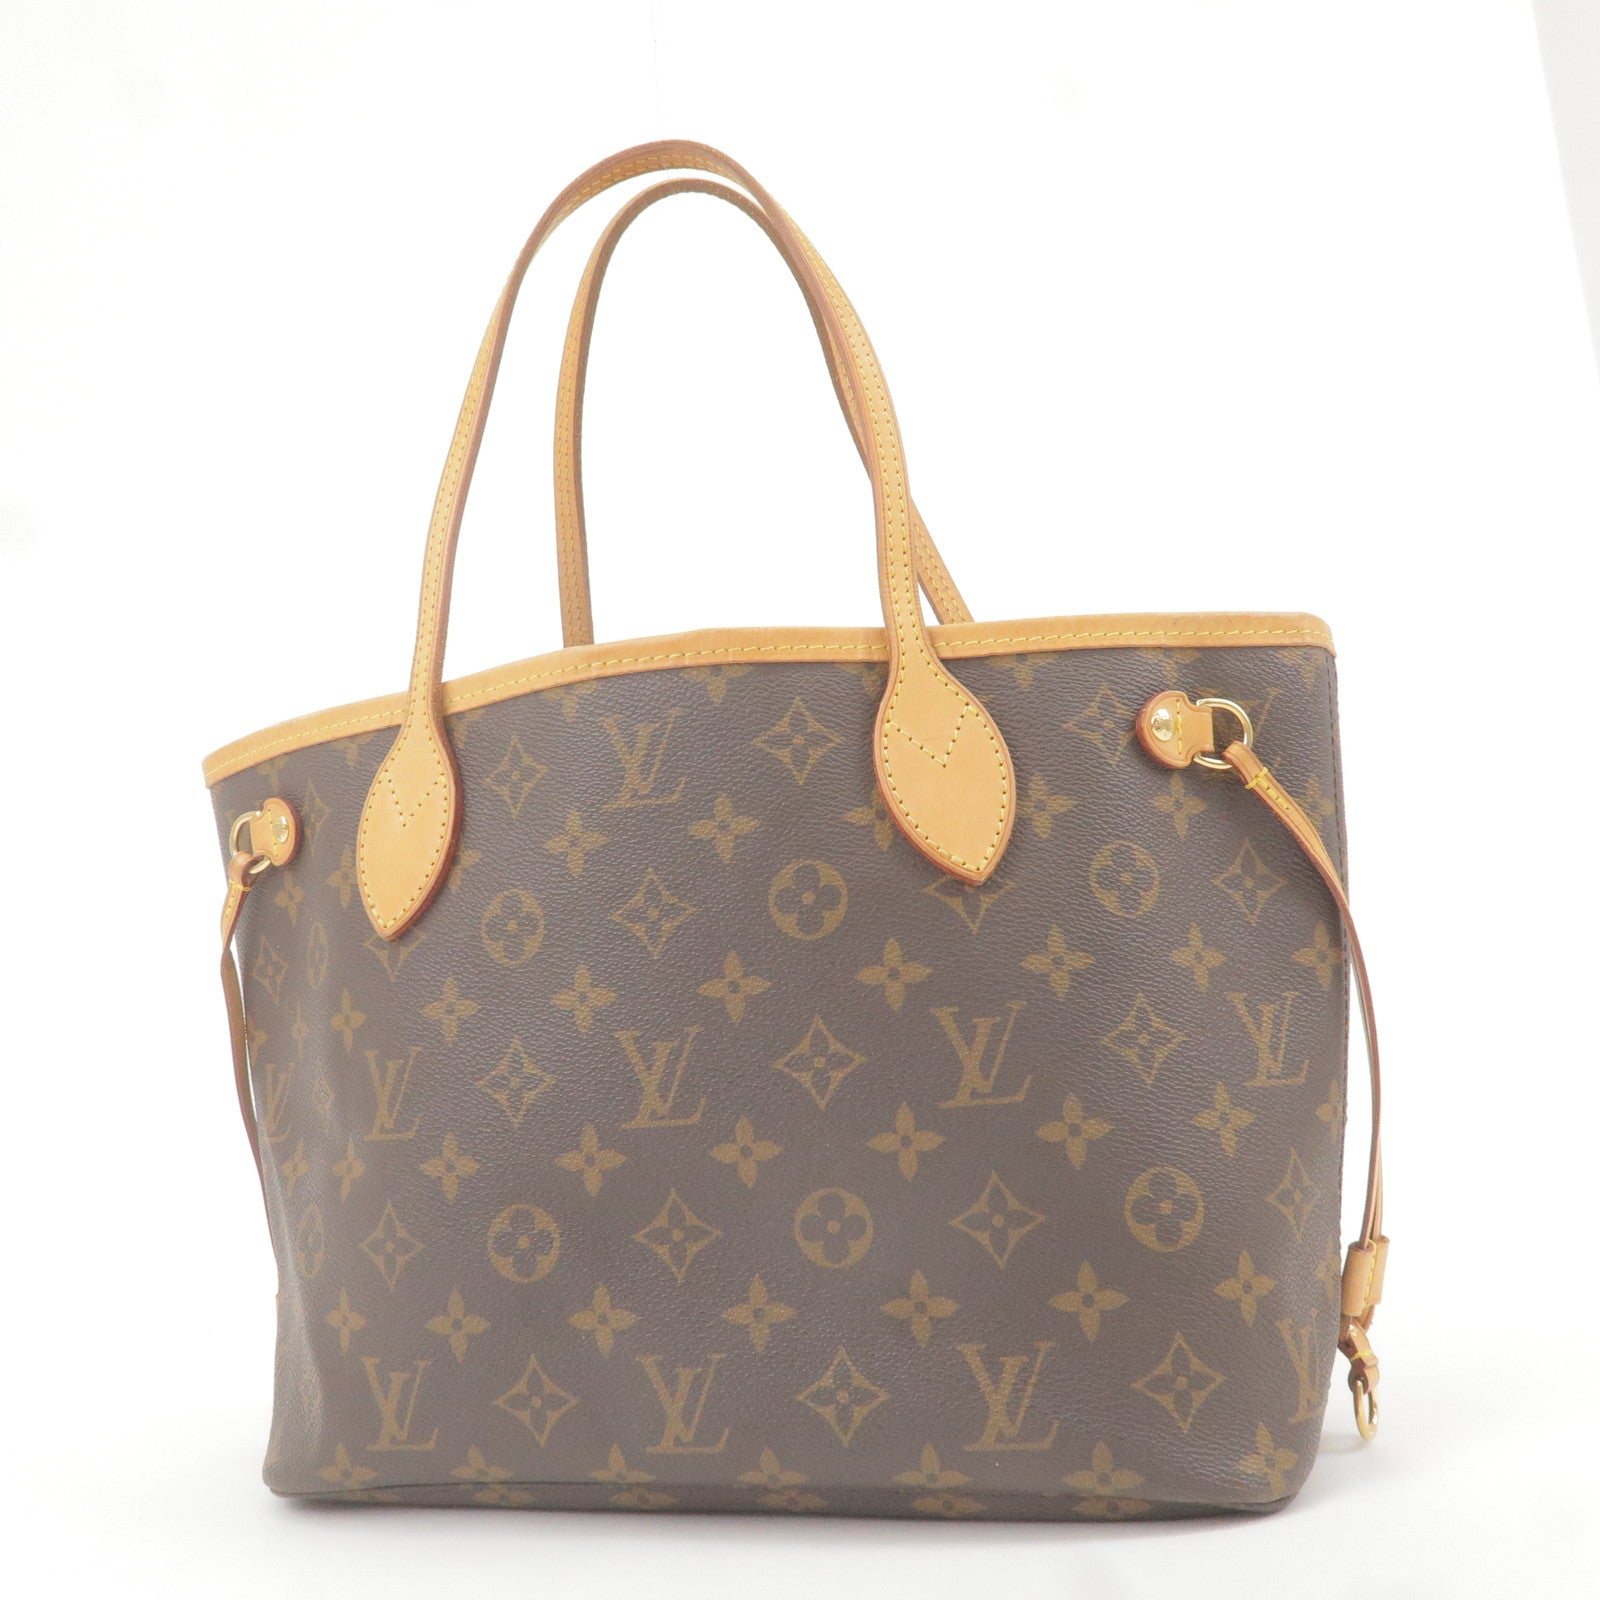 Louis Vuitton Neverfull Pm Tote Bag